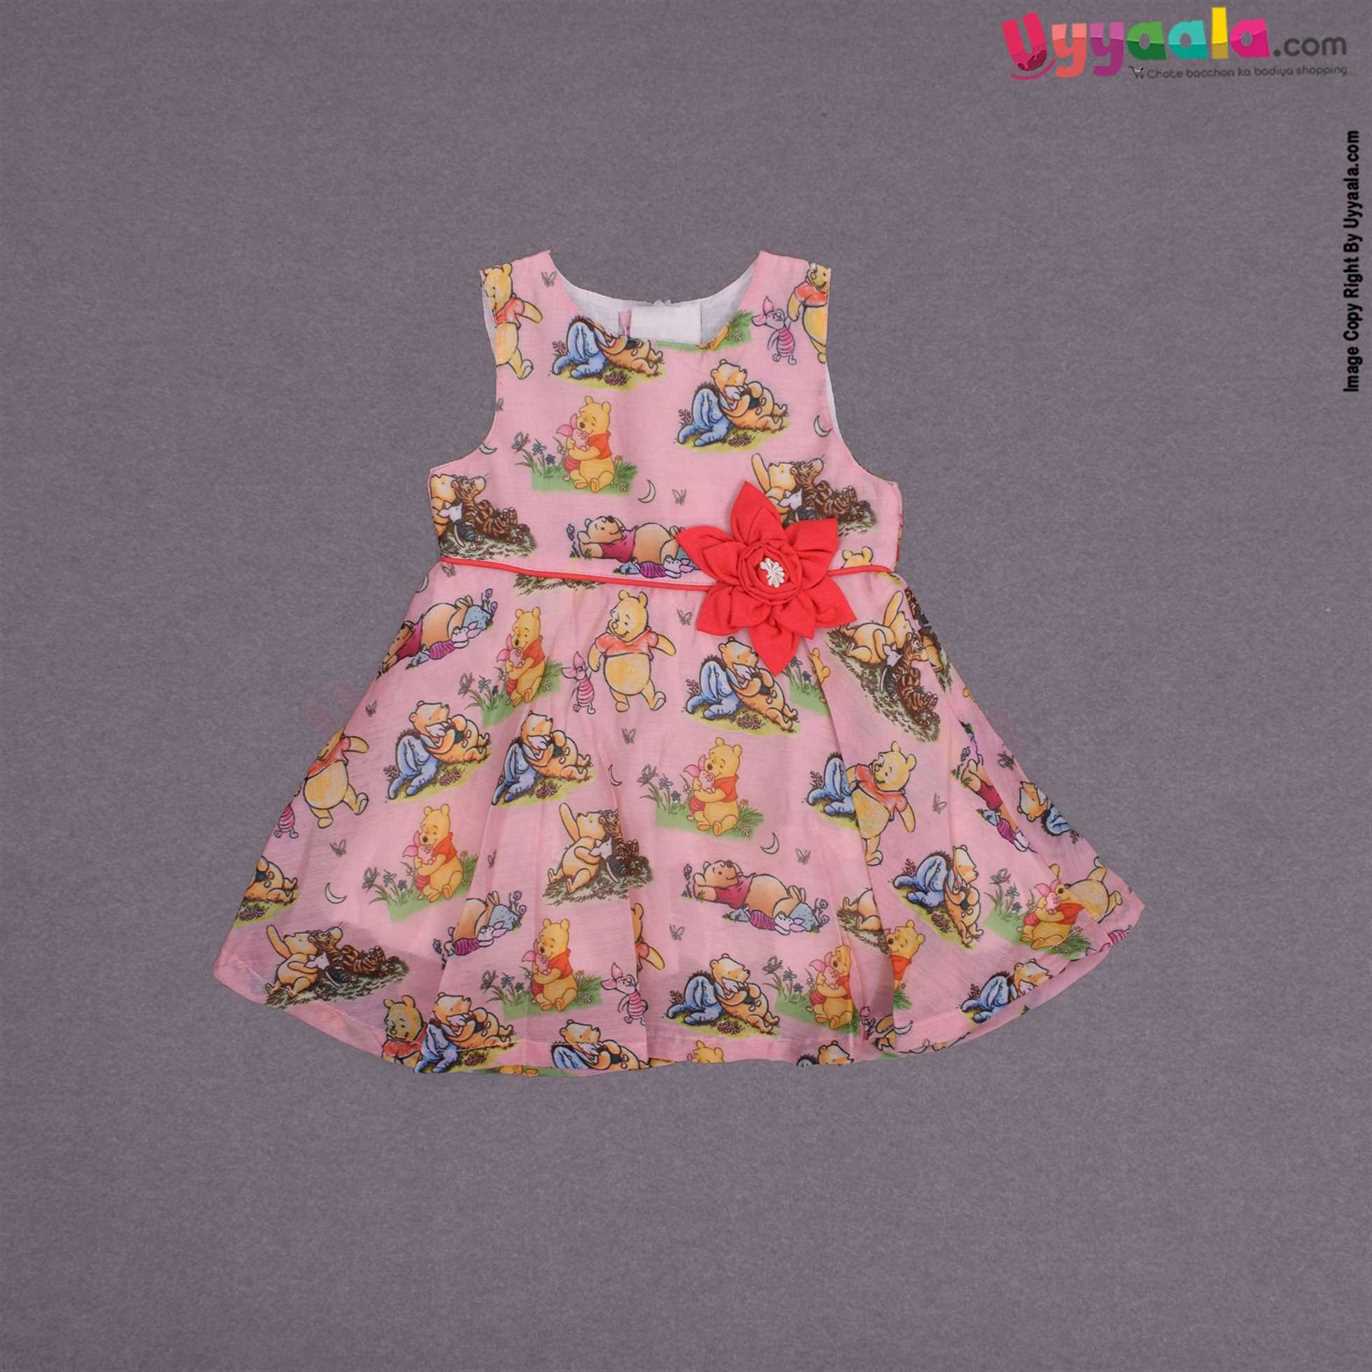 Party wear frock for baby girl